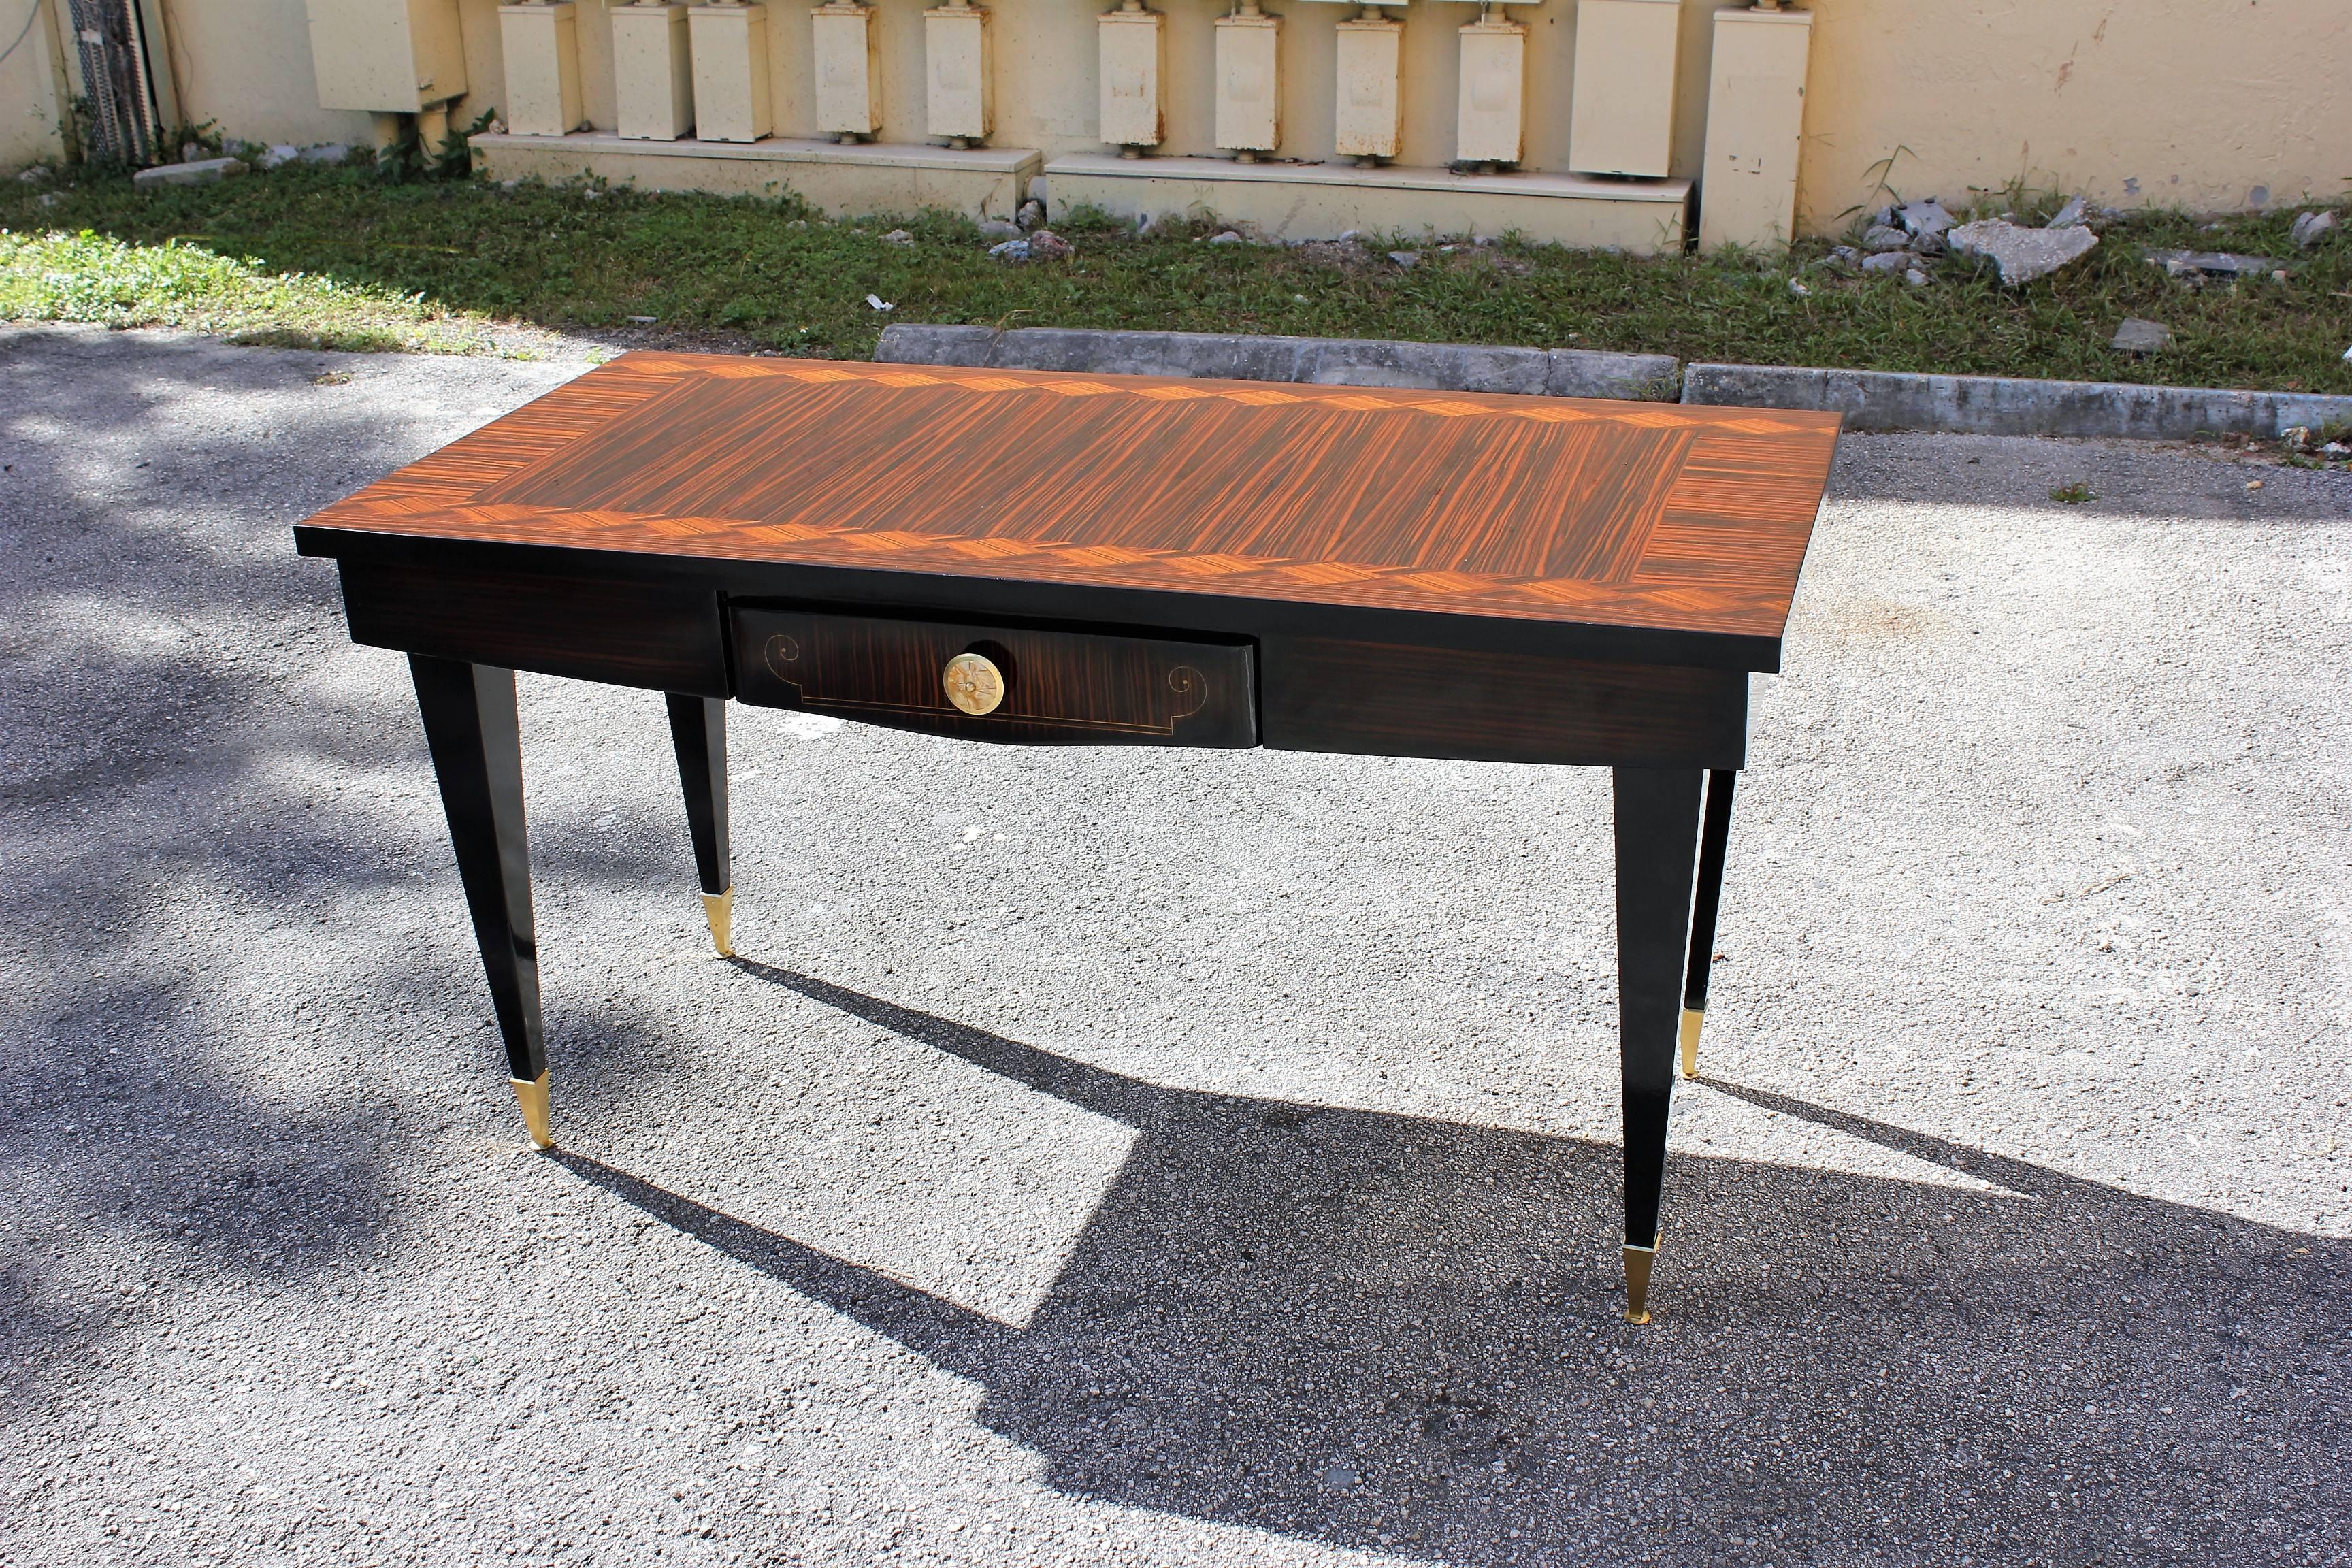 A stunning French Art Deco exotic Macassar ebony writing desk. Parquetry wood! With mother-of-pearl hardware drawer, brass accents on the legs and brass toe caps. Ebony legs. Size. 57 W, 27 D, 30 25 H. We traveled to buy all our pieces in France .We